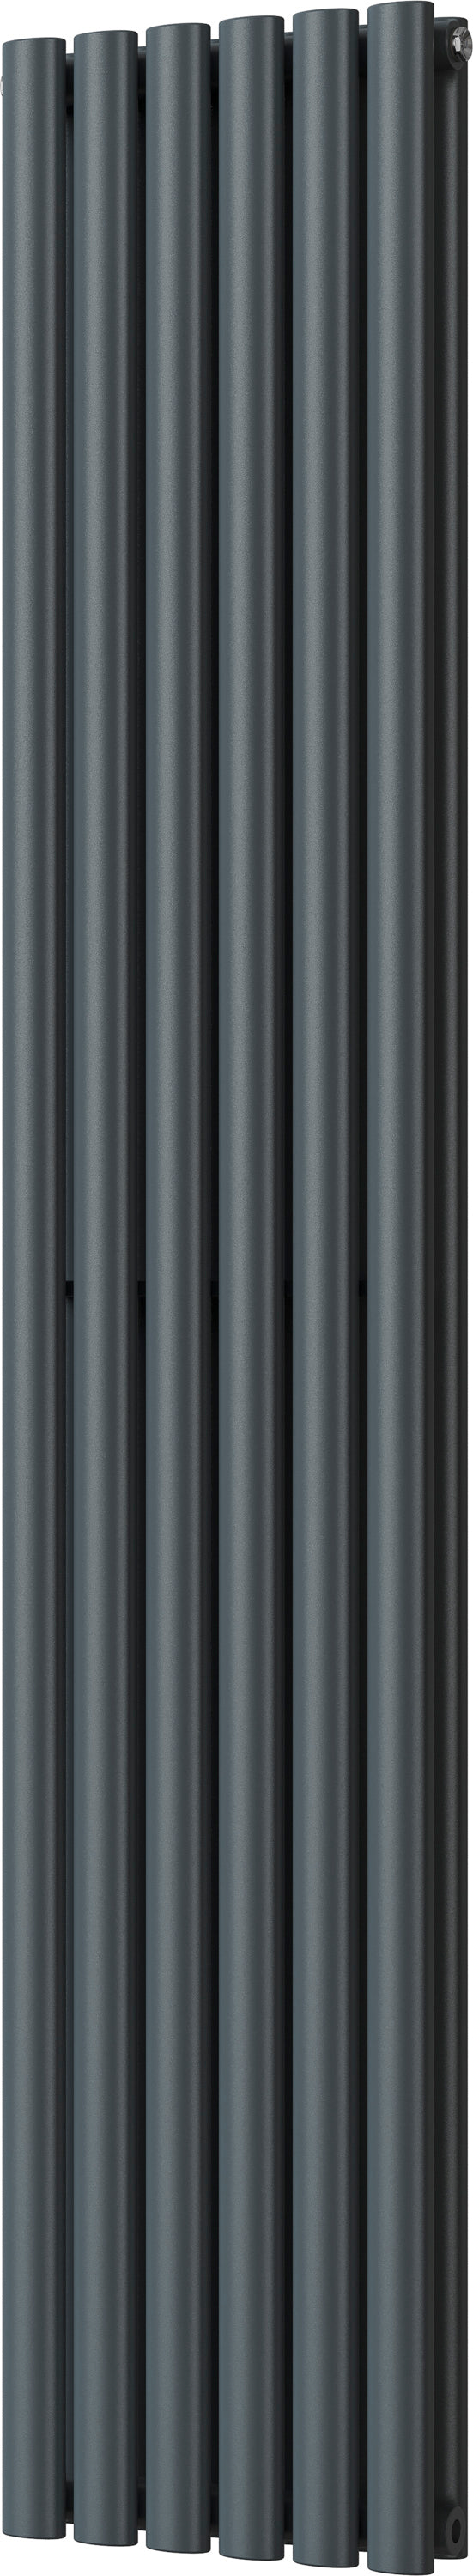 Omeara - Anthracite Vertical Radiator H1800mm x W348mm Double Panel